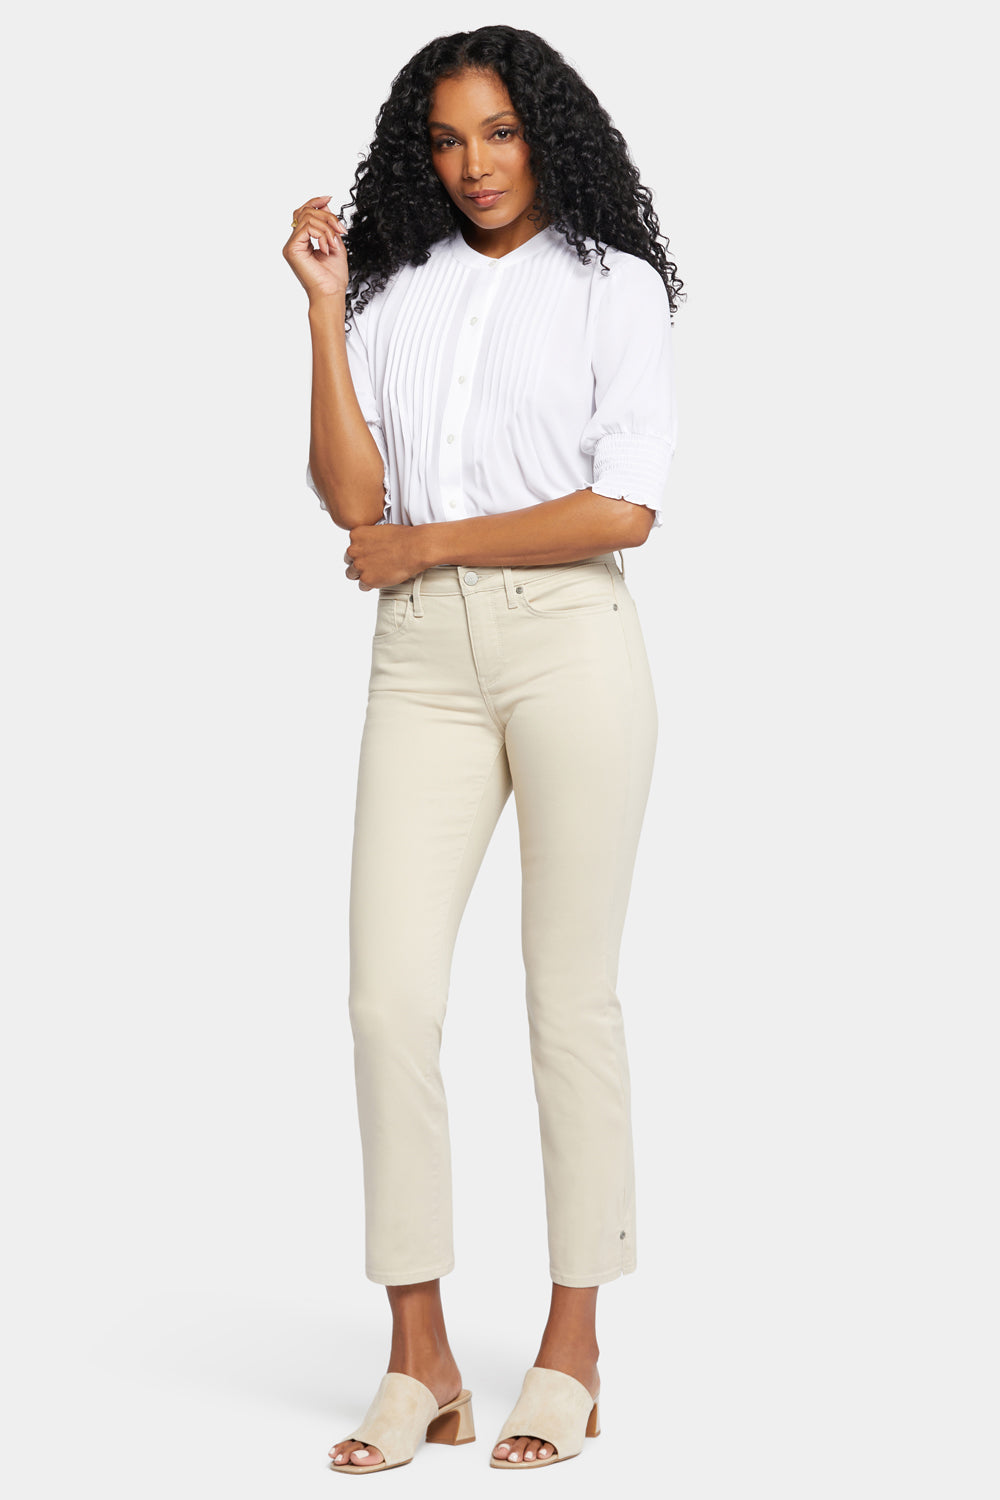 NYDJ Sheri Slim Ankle Jeans With Riveted Side Slits - Feather